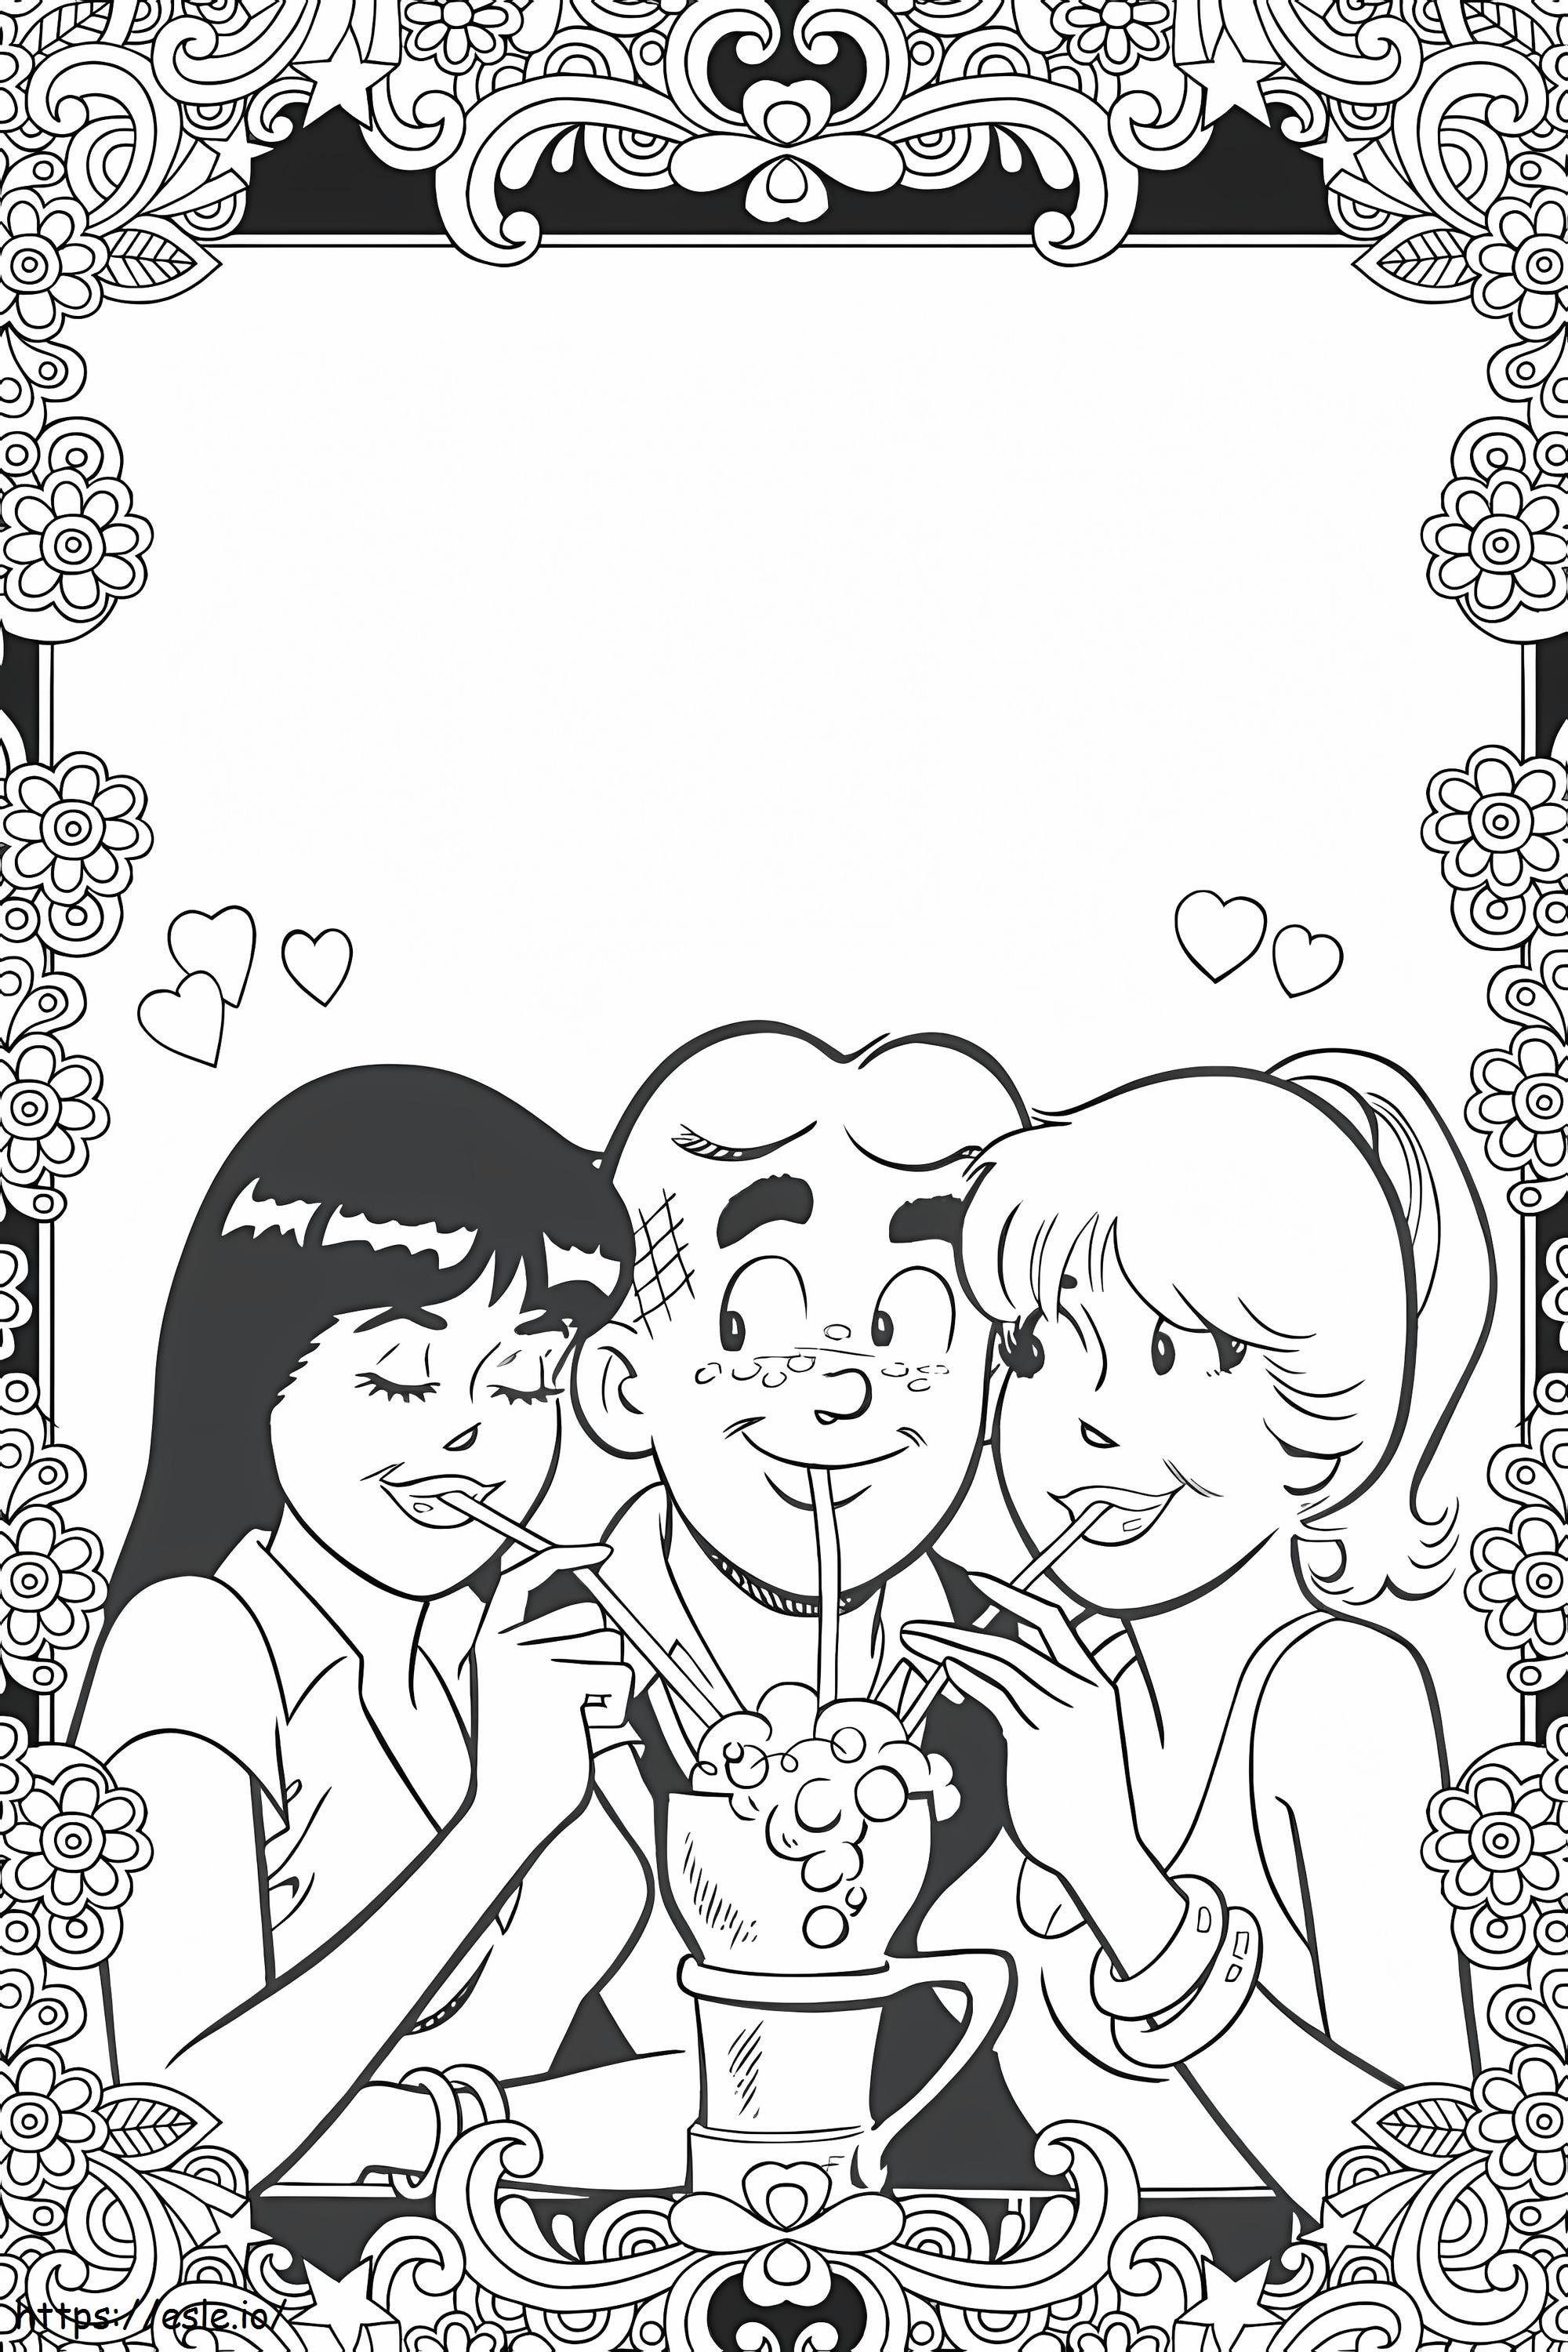 Riverdale 2 coloring page